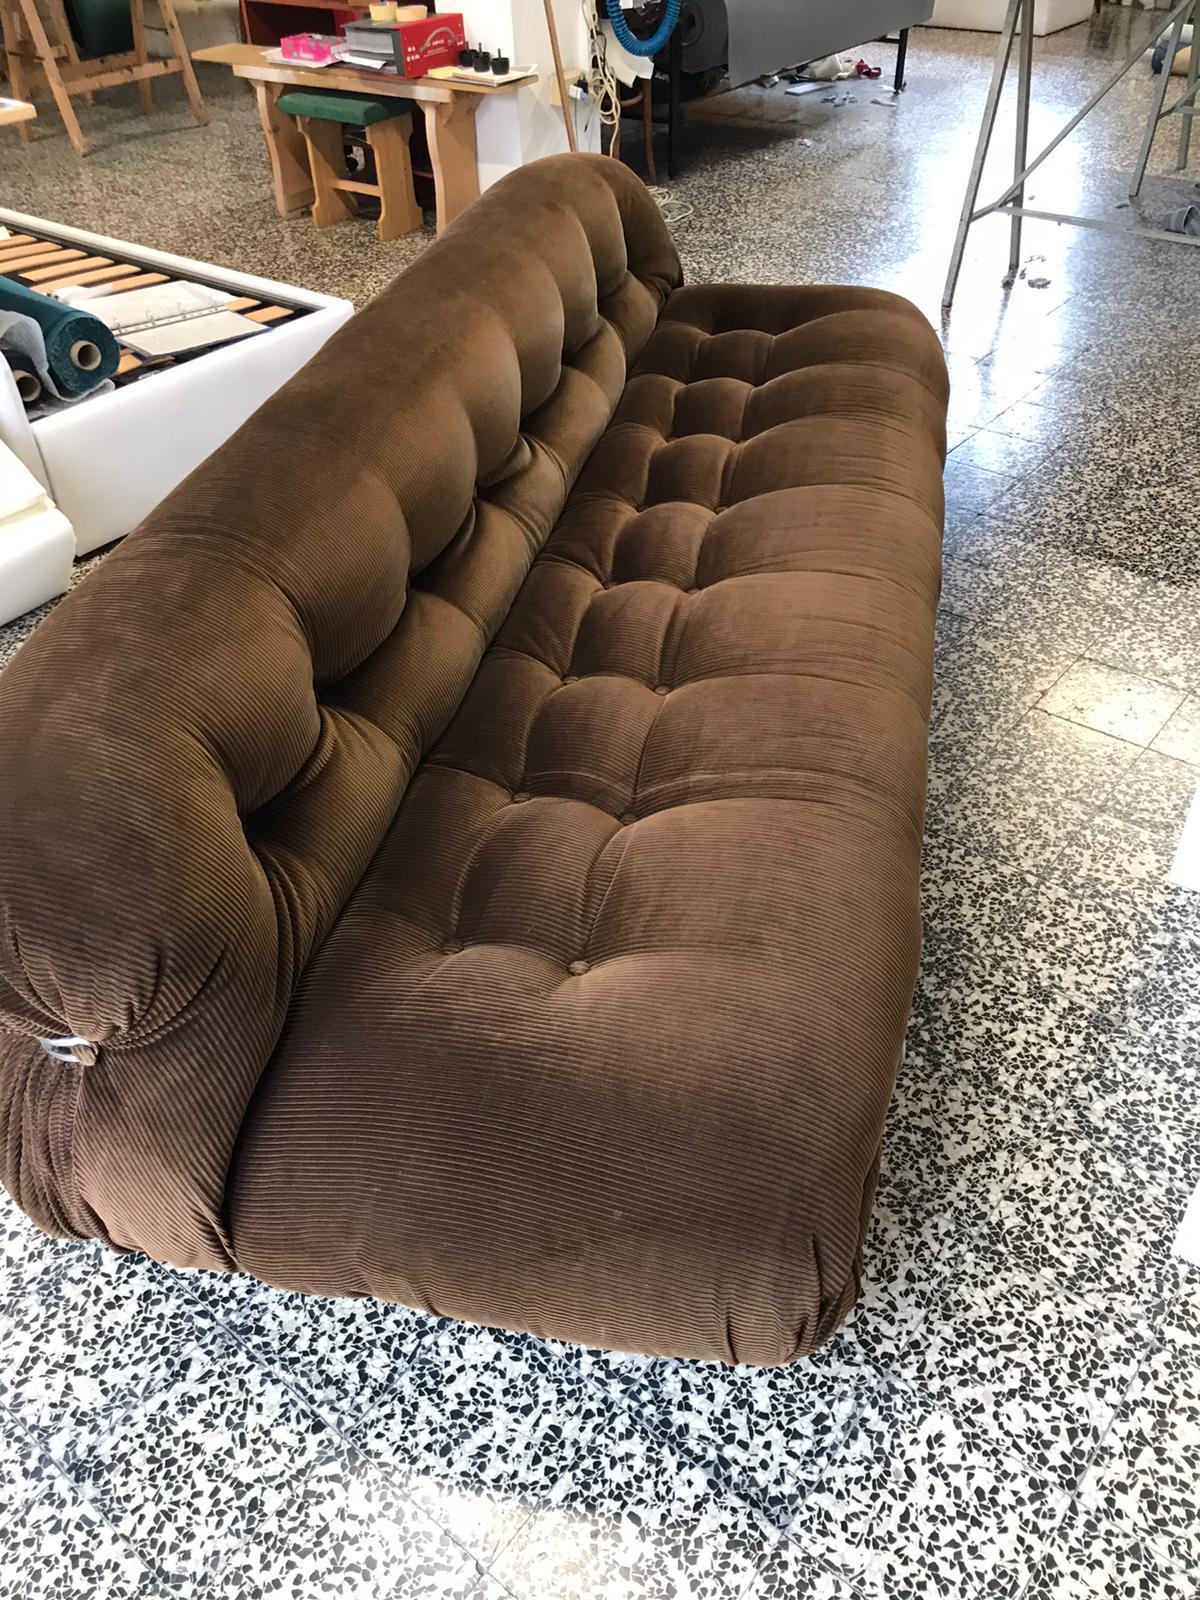 Soriana sofa design Tobia Scarpa for Cassina 1970s, with original corduroy brown fabric in good vintage condition, consistent with age and use. Large sofa version with three front metal clamps and two lounge chairs set. Sofa is currently being